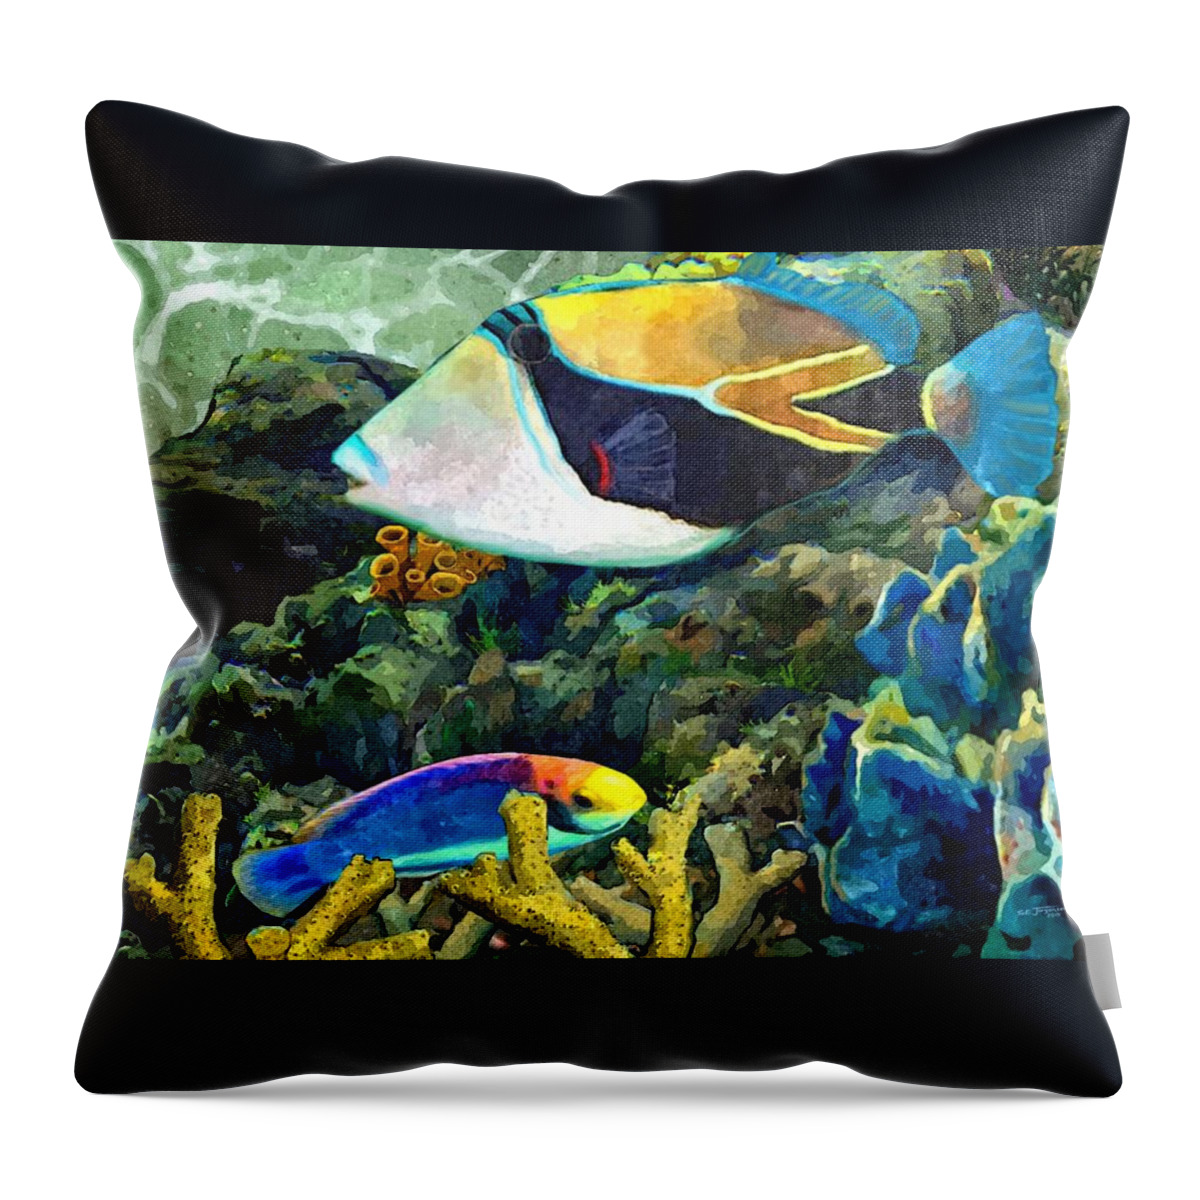 Hawaiian Fish Throw Pillow featuring the painting Humuhumu And a Wrasse by Stephen Jorgensen